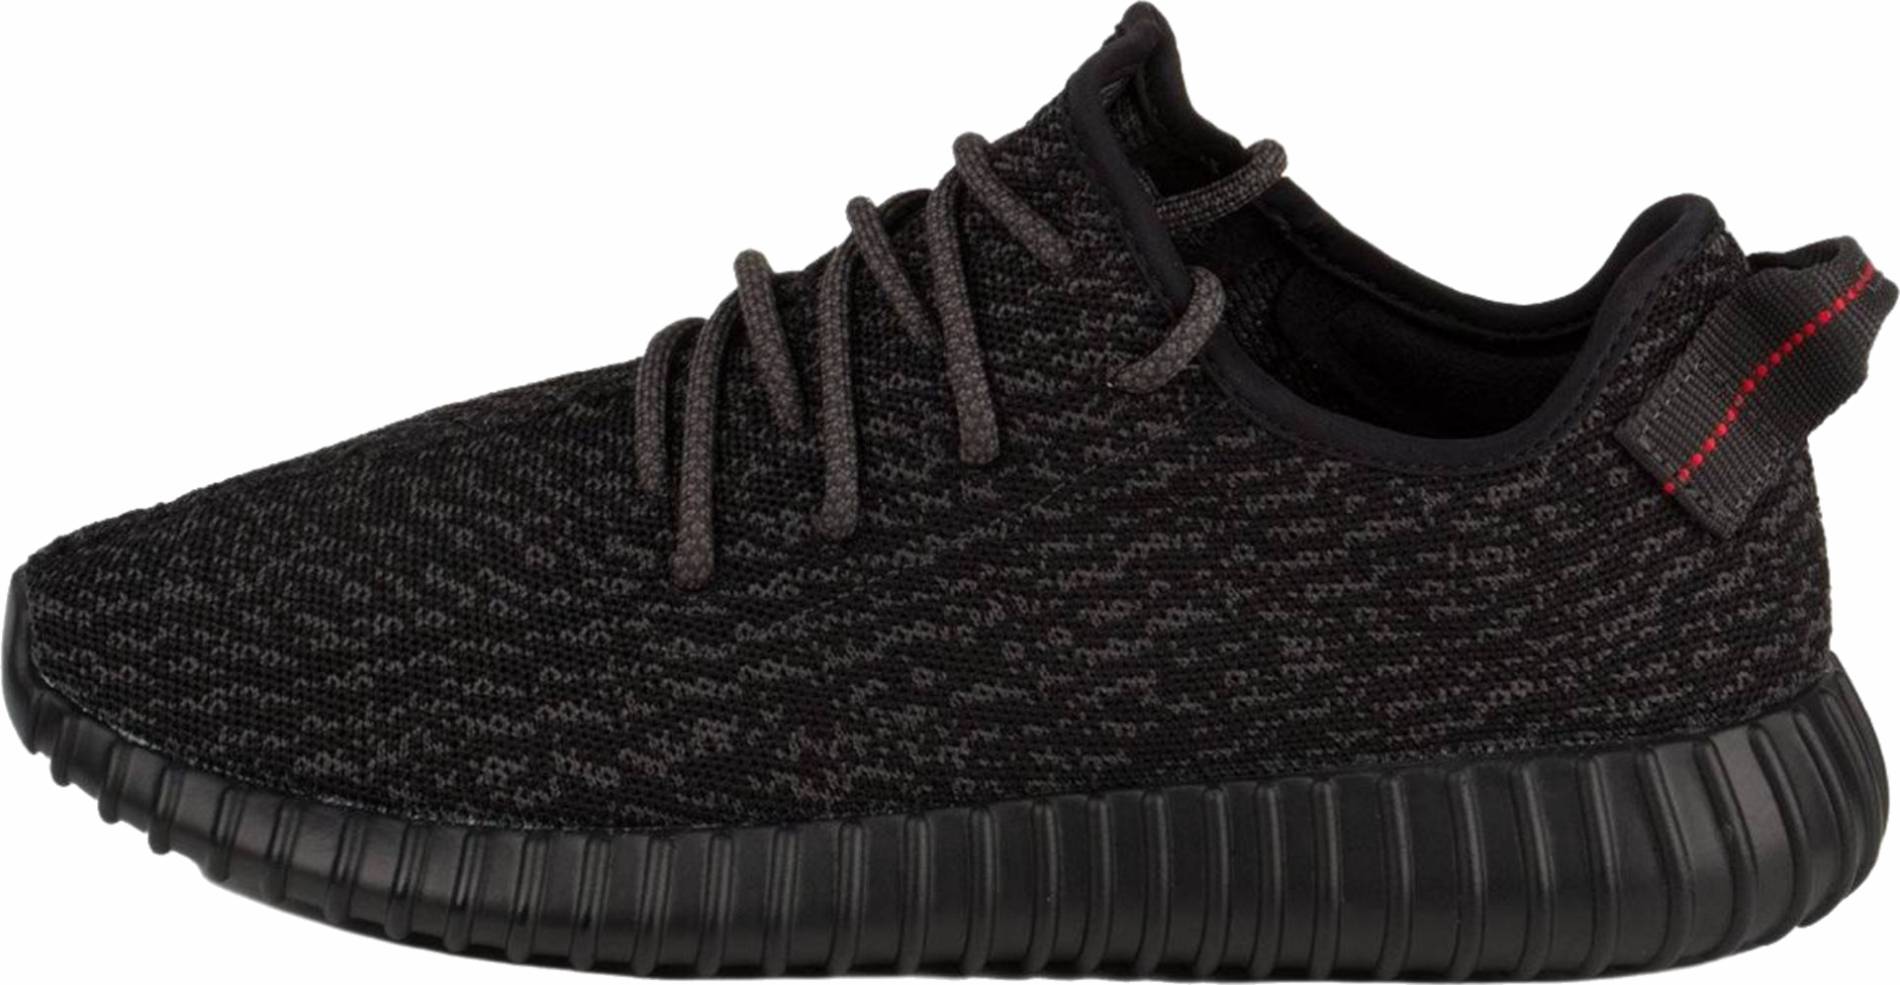 3823 + Review of Adidas Yeezy 350 Boost 